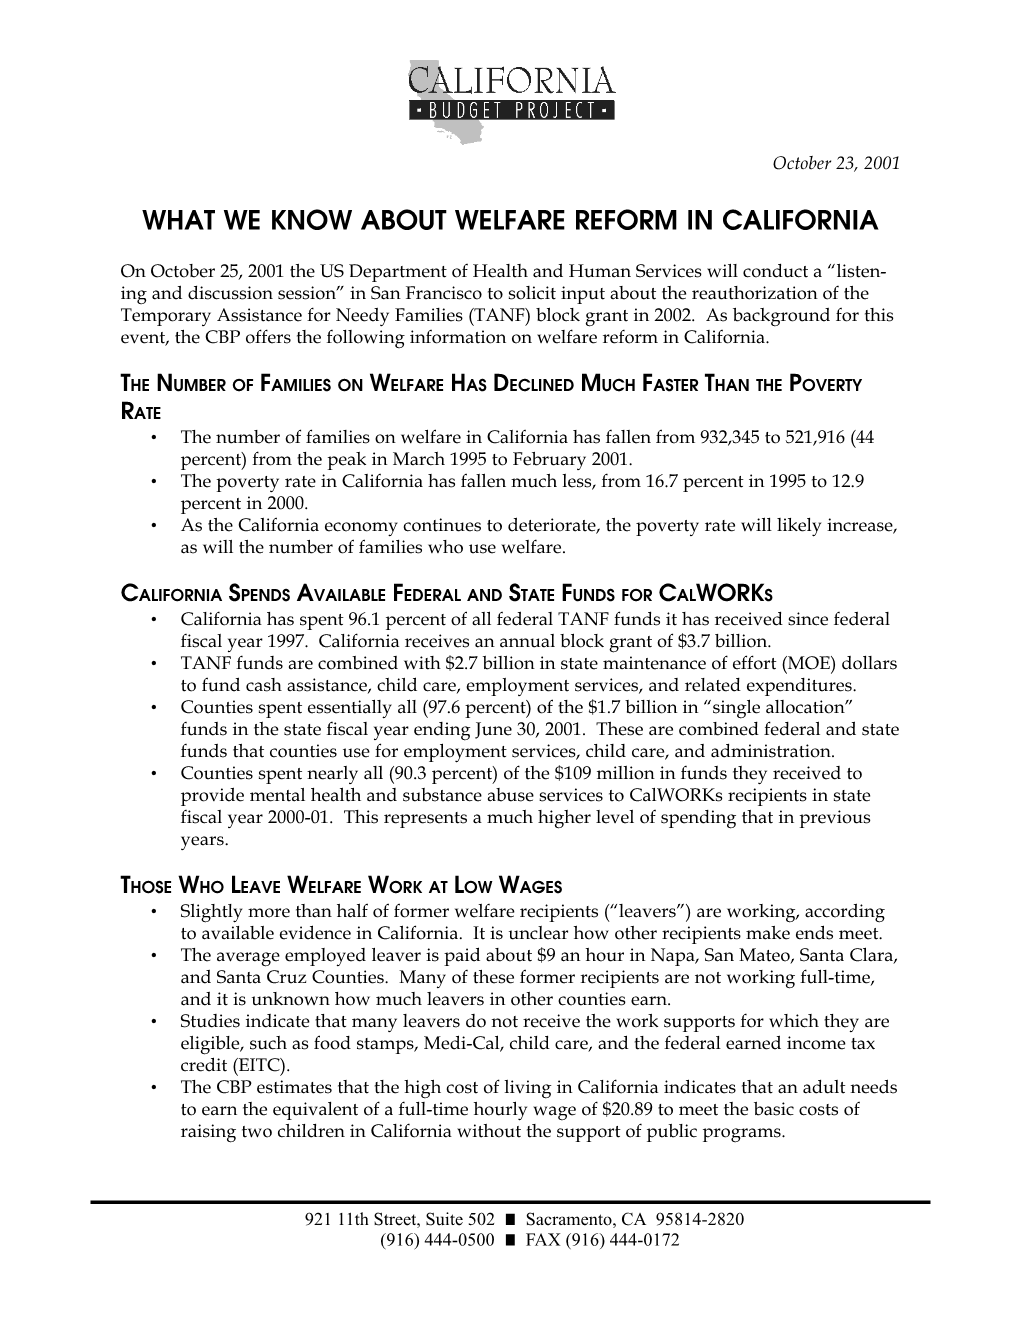 What We Know About Welfare Reform in California